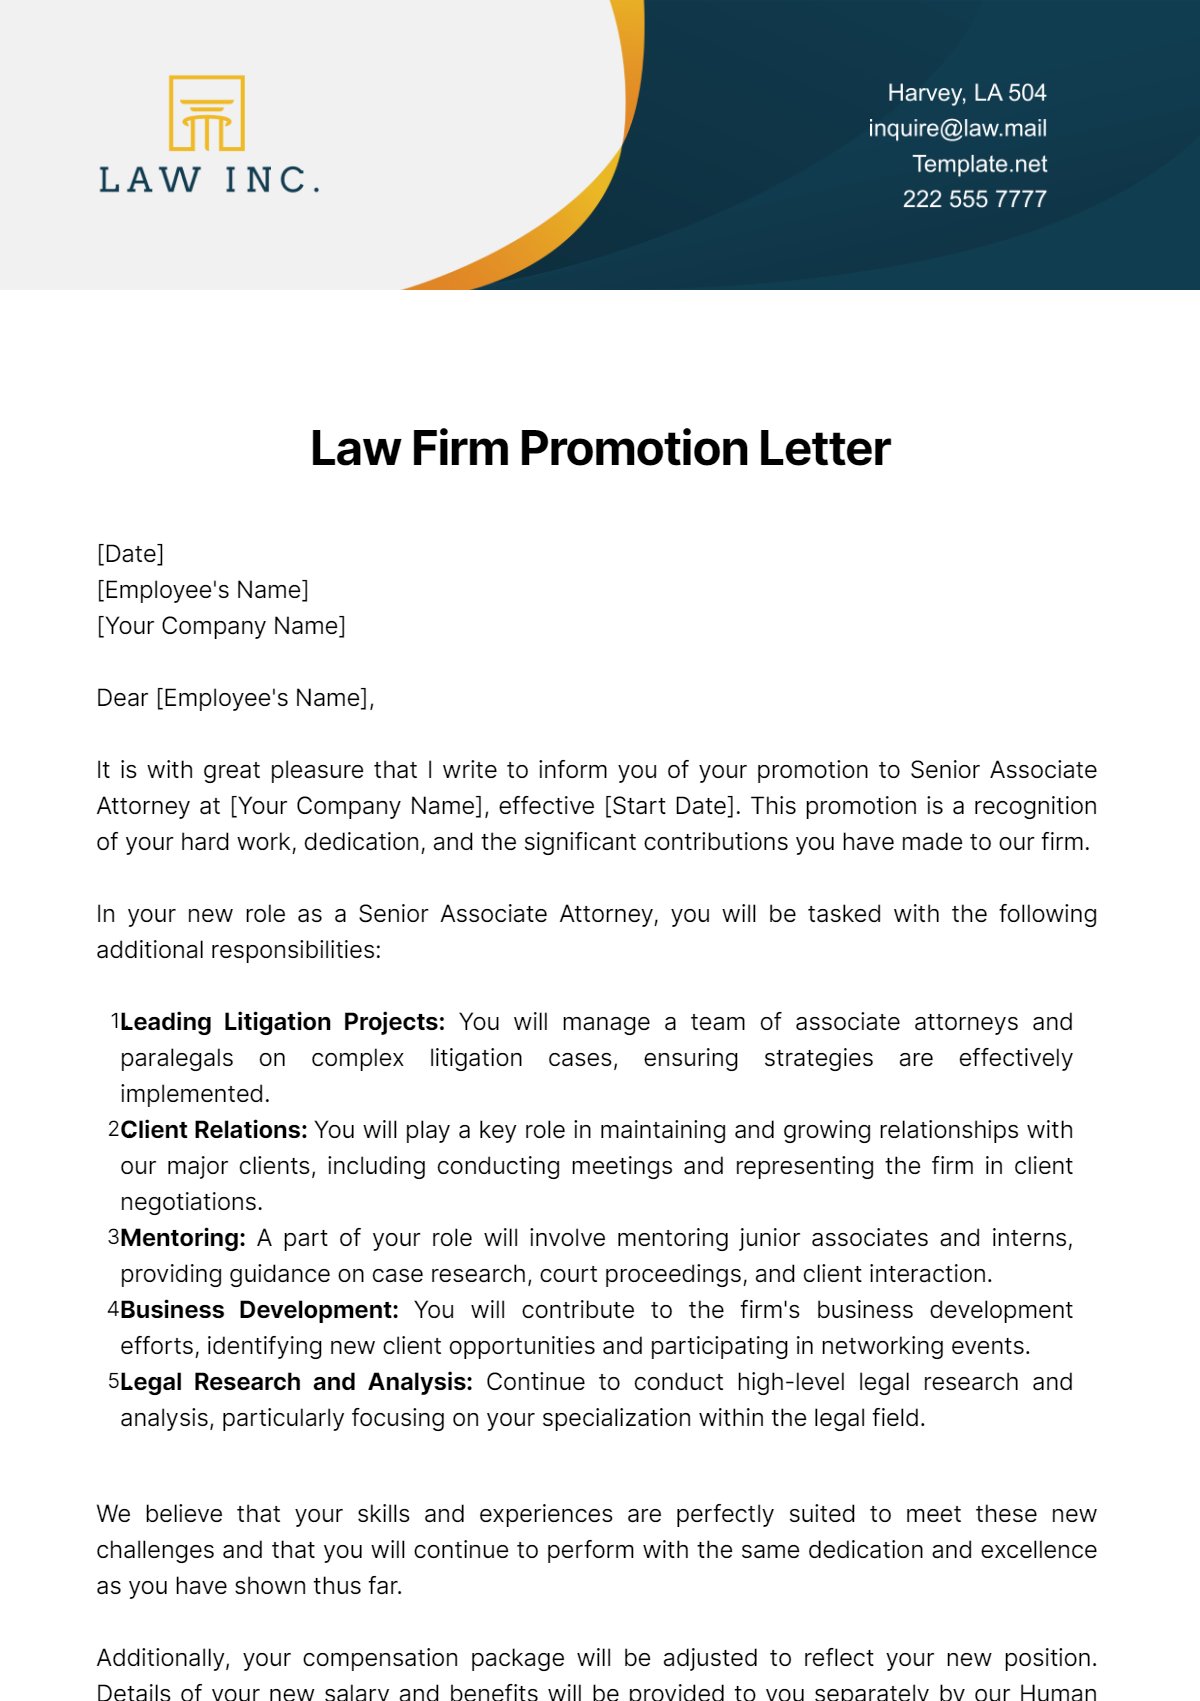 Free Law Firm Promotion Letter Template